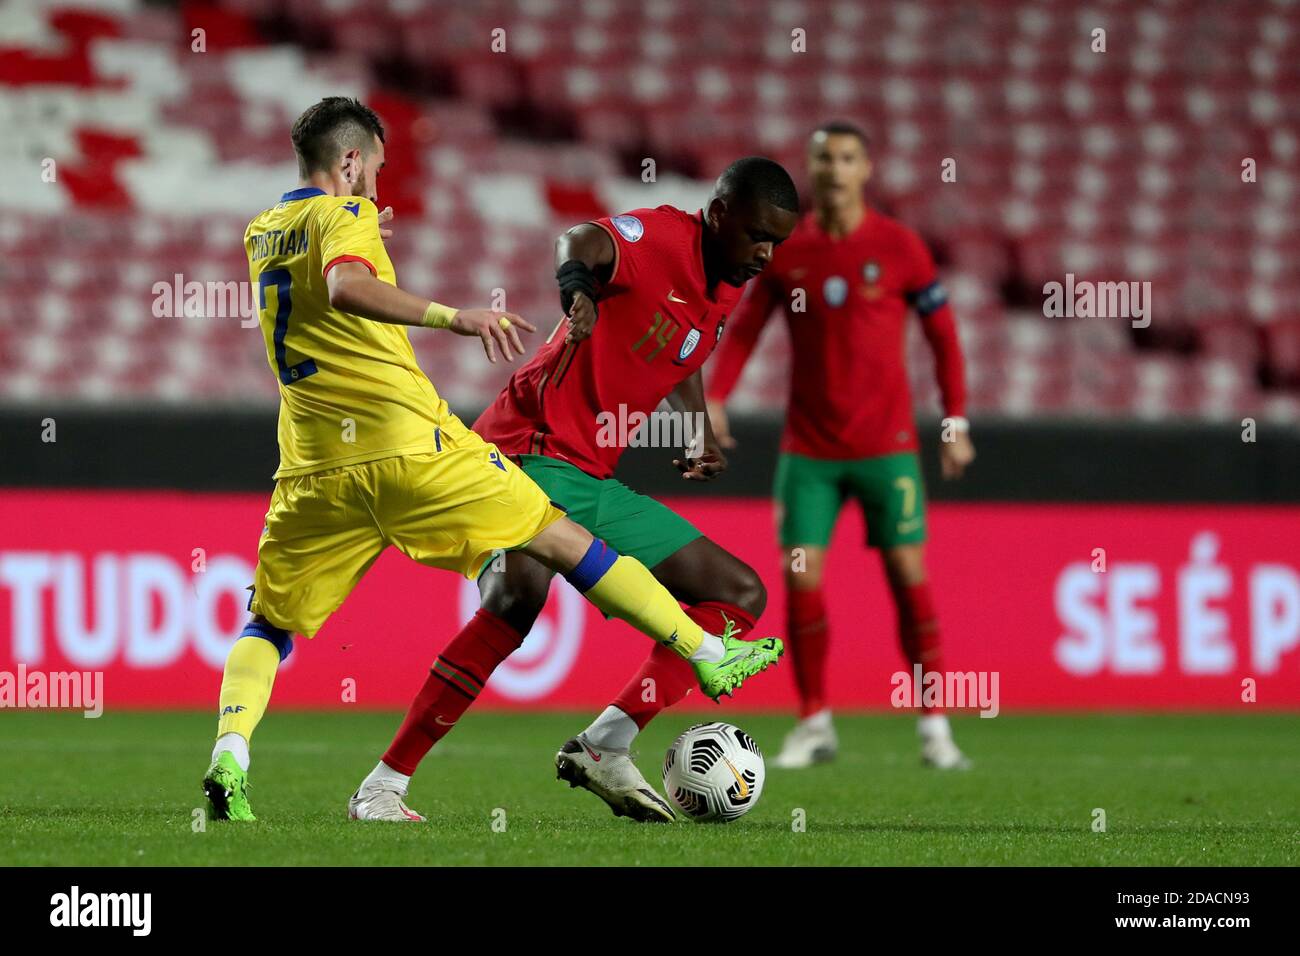 Lisbon, Portugal. 11th Nov, 2020. William Carvalho of Portugal (R ) vies with Cristian Martinez of Andorra during the friendly football match between Portugal and Andorra, at the Luz stadium in Lisbon, Portugal, on November 11, 2020. Credit: Pedro Fiuza/ZUMA Wire/Alamy Live News Stock Photo